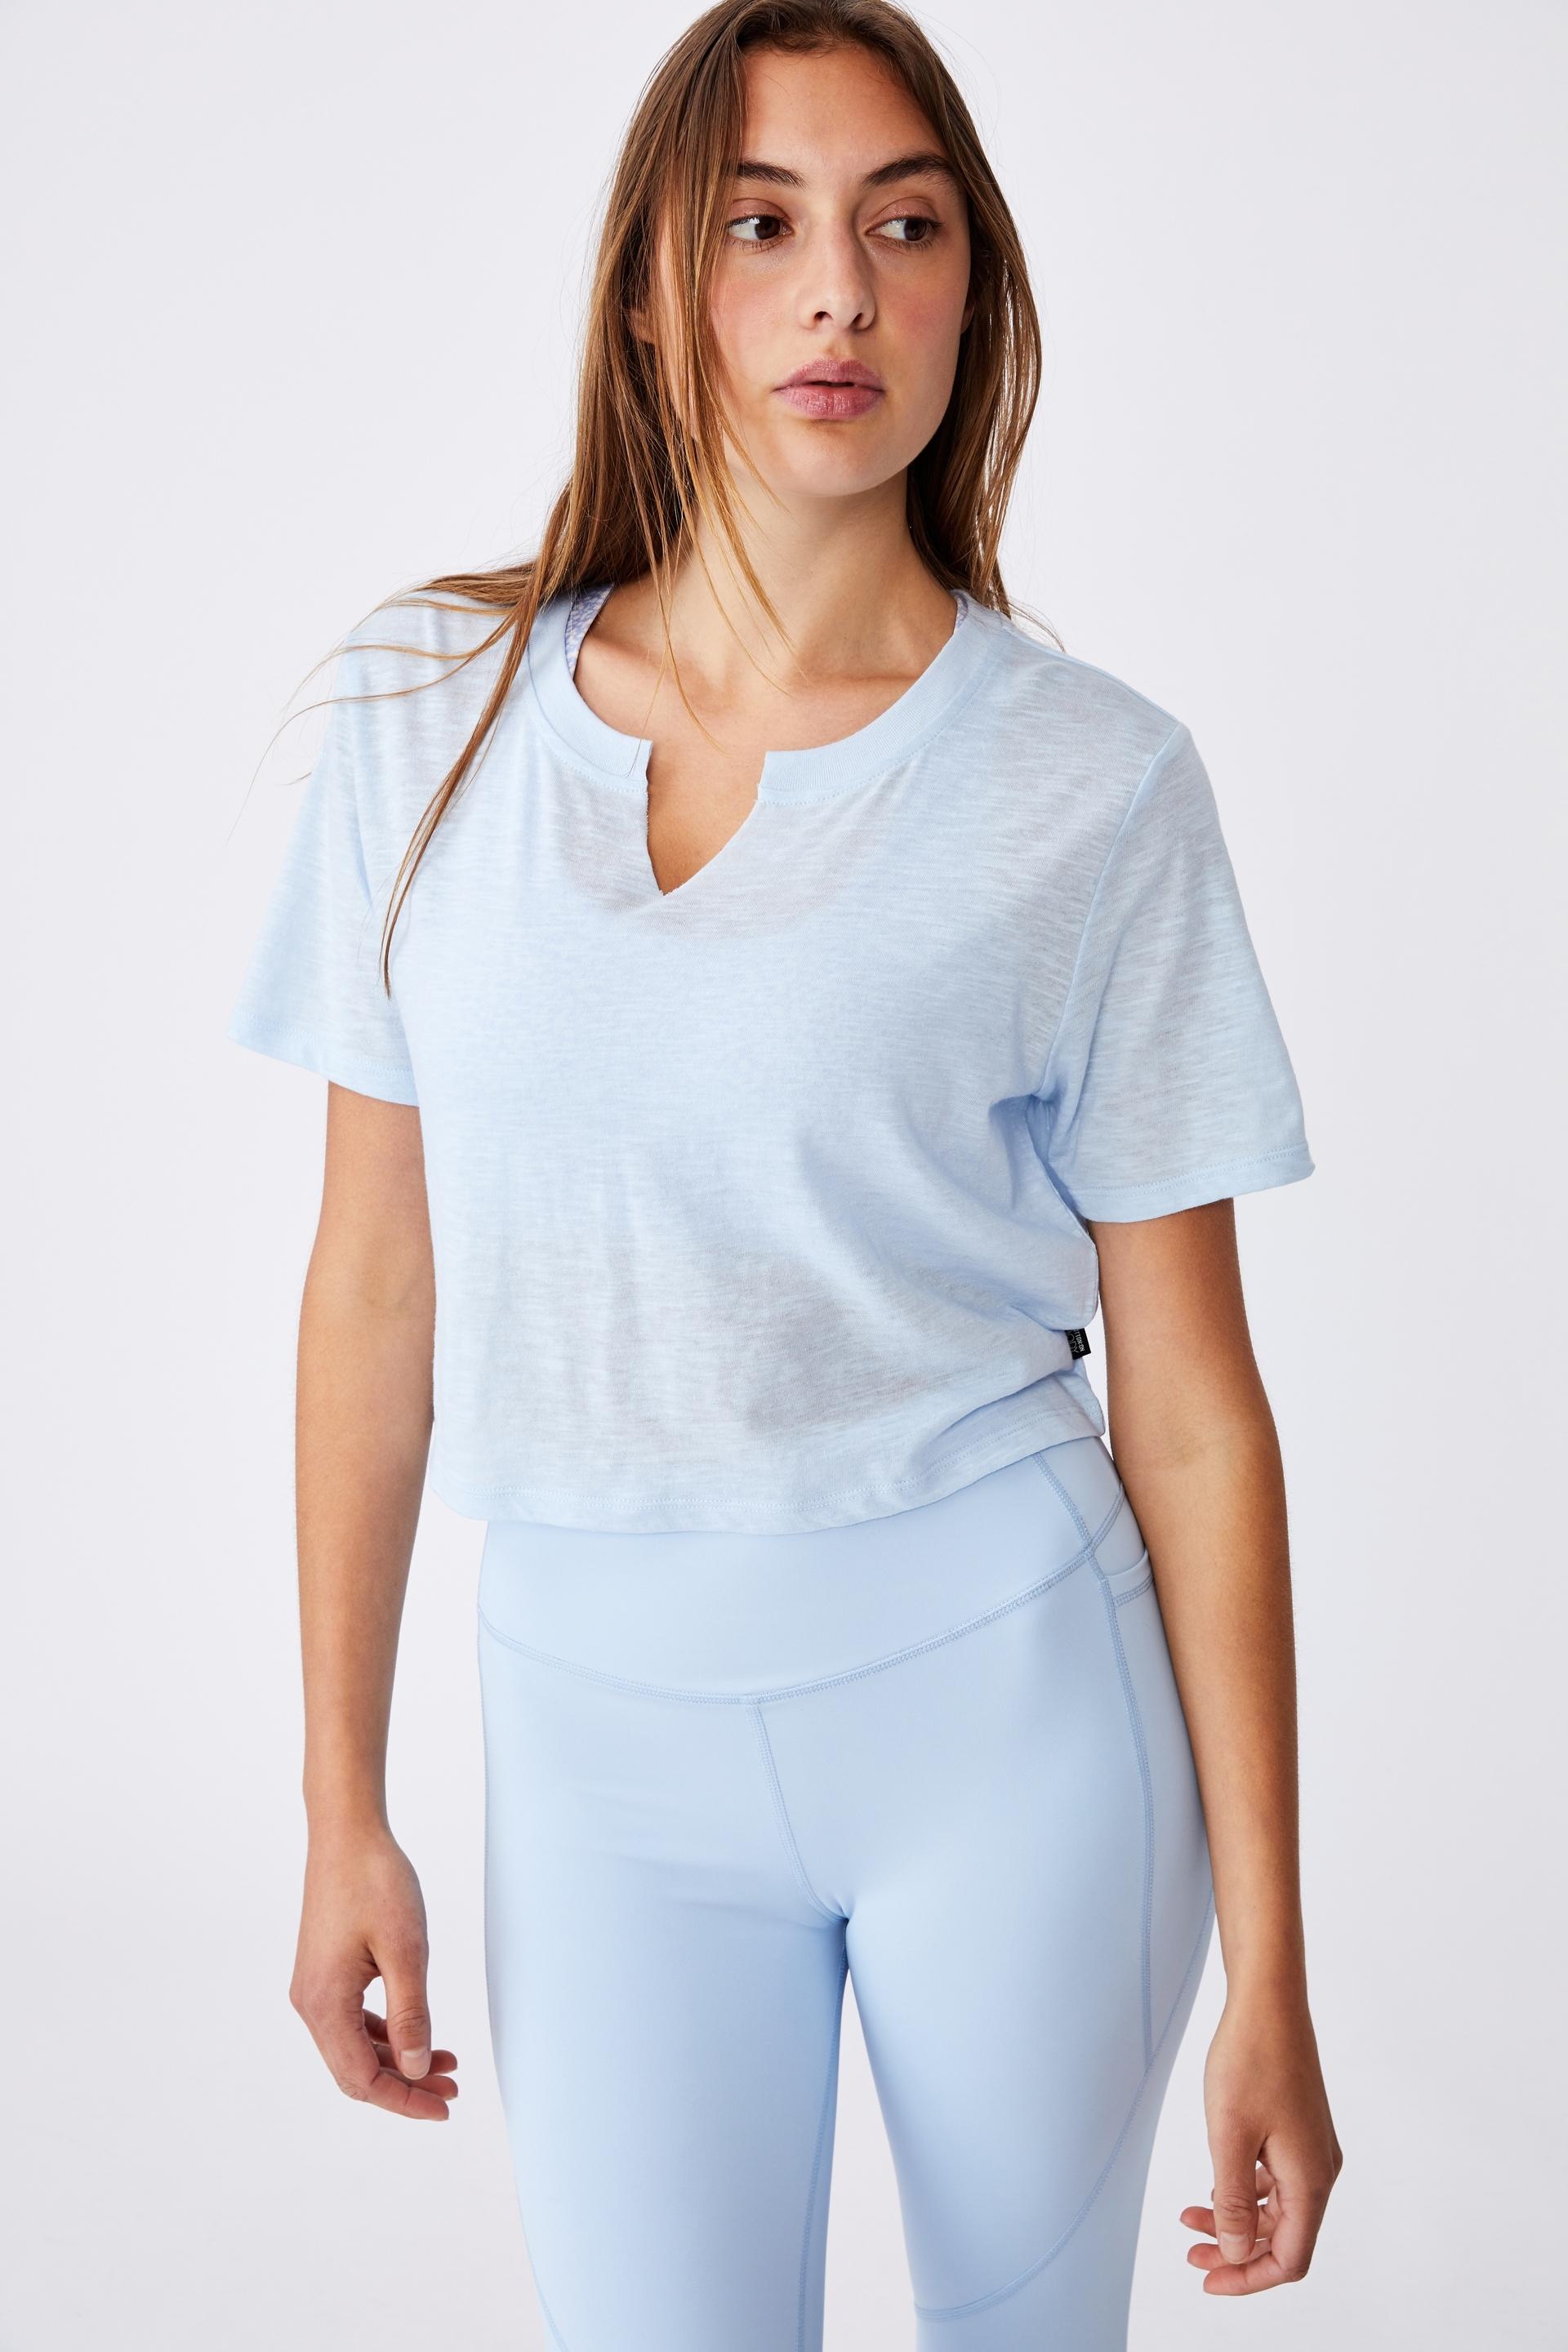 All things fabulous cropped tshirt - baby blue Cotton On T-Shirts ...